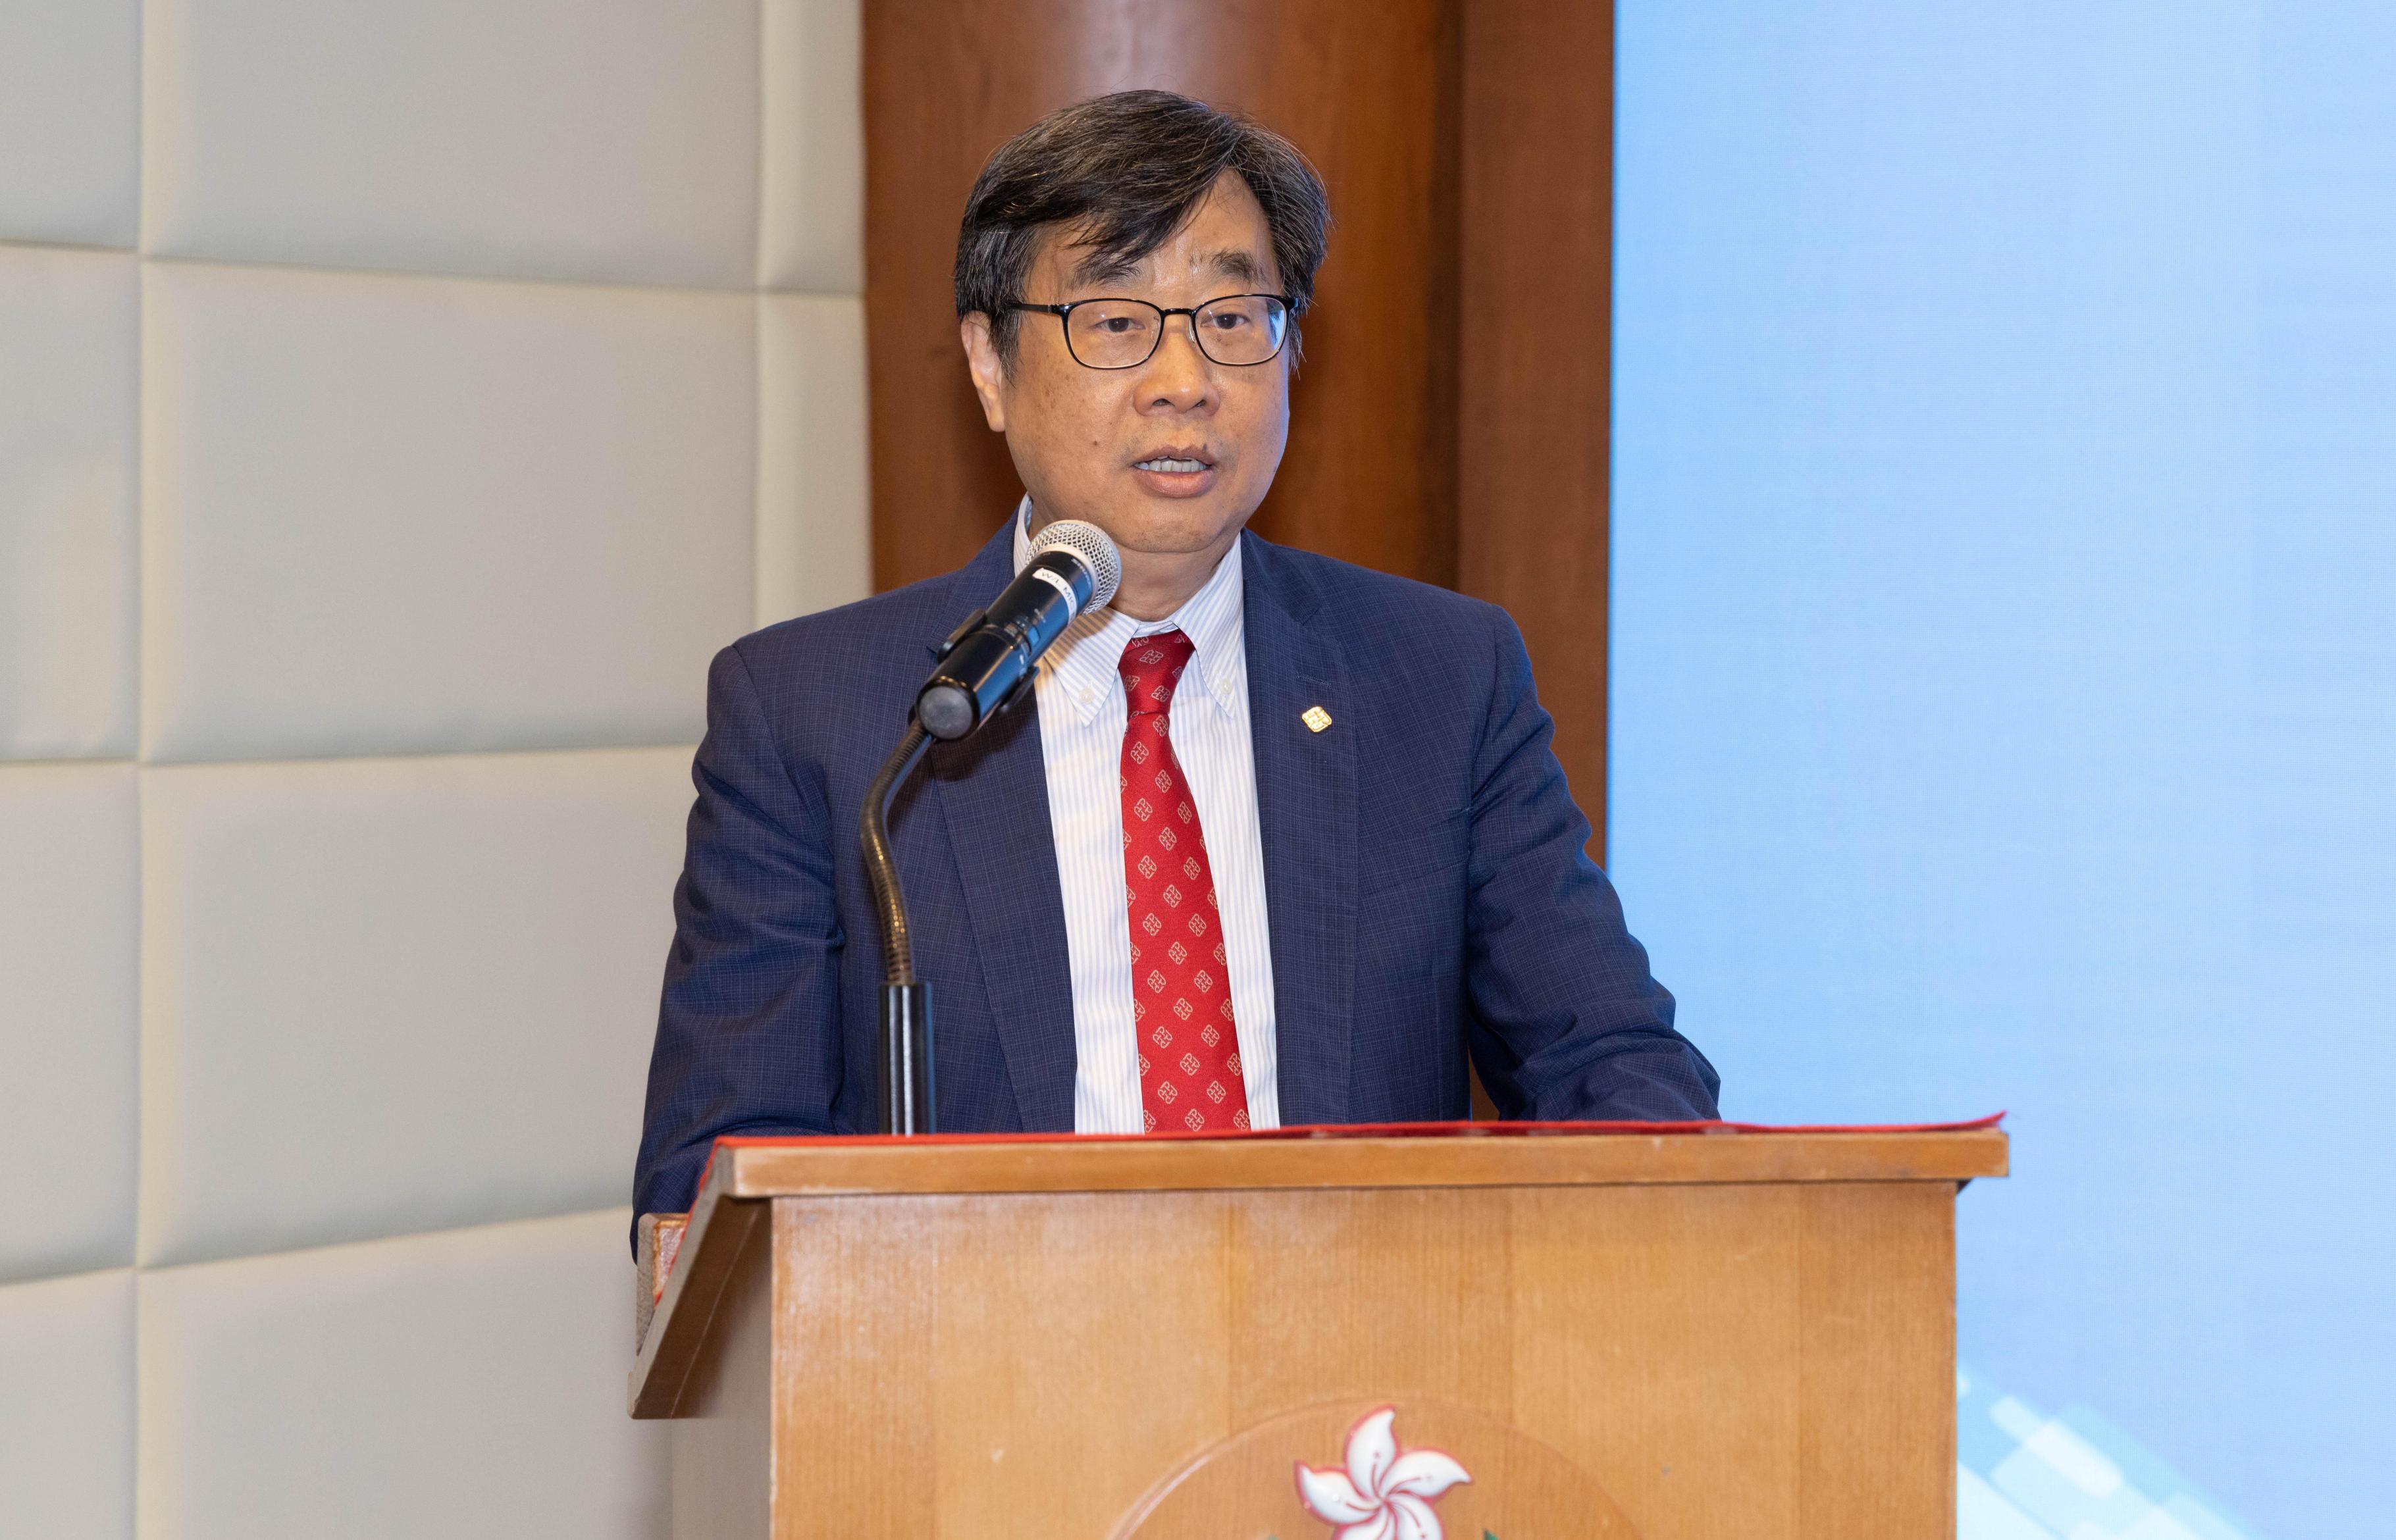 The Fire Services Department and the Hong Kong Polytechnic University (PolyU) signed a Memorandum of Understanding today (June 7). Photo shows the Dean of the Faculty of Health and Social Sciences of PolyU, Professor David Shum, speaking at the signing ceremony.